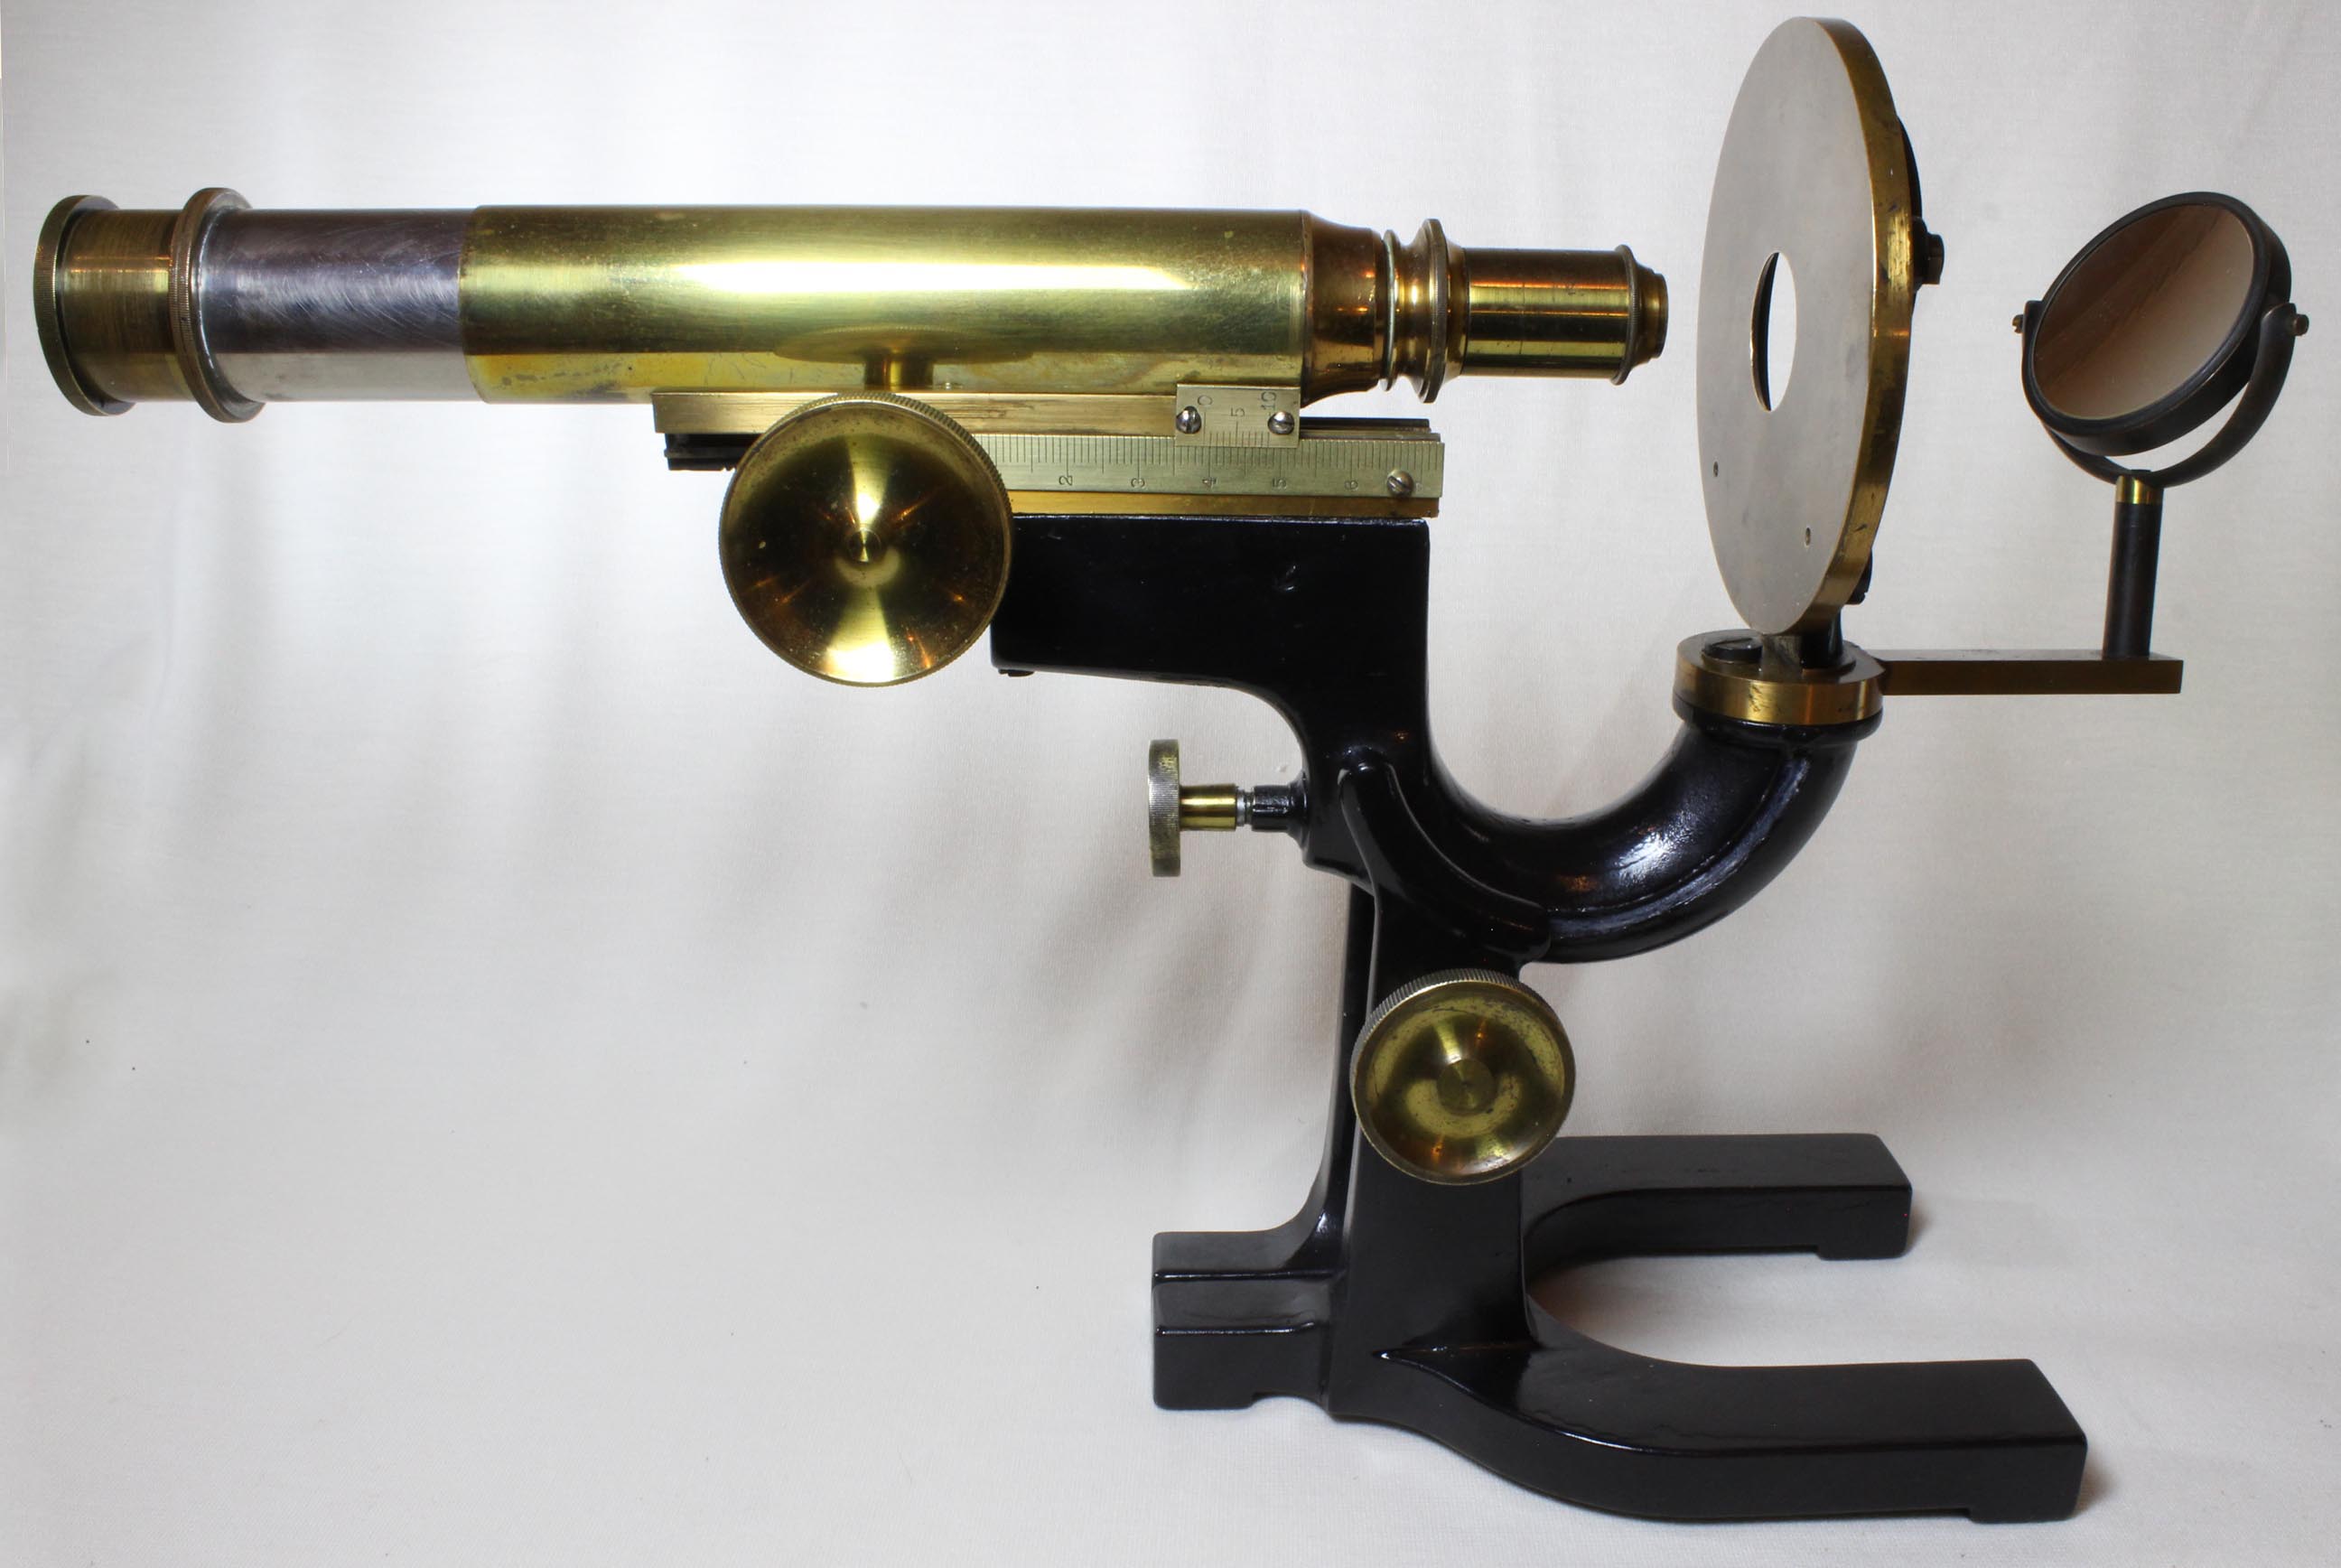 Wale Limb Microscope by B and L